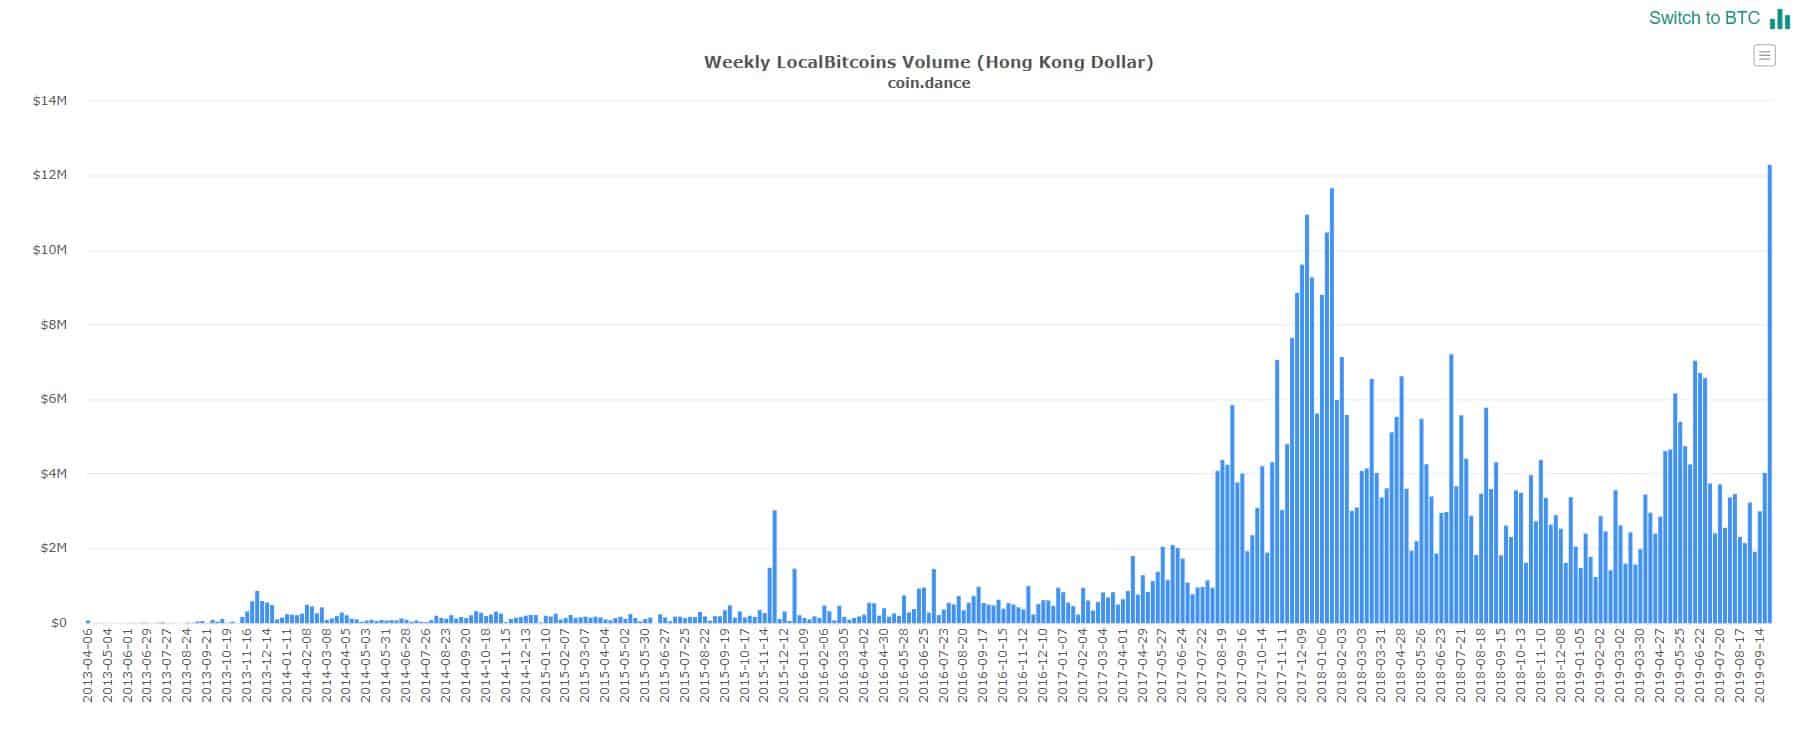 Bitcoin Trading Volume in Hong Kong Skyrockets to ATH as Protests Rage On